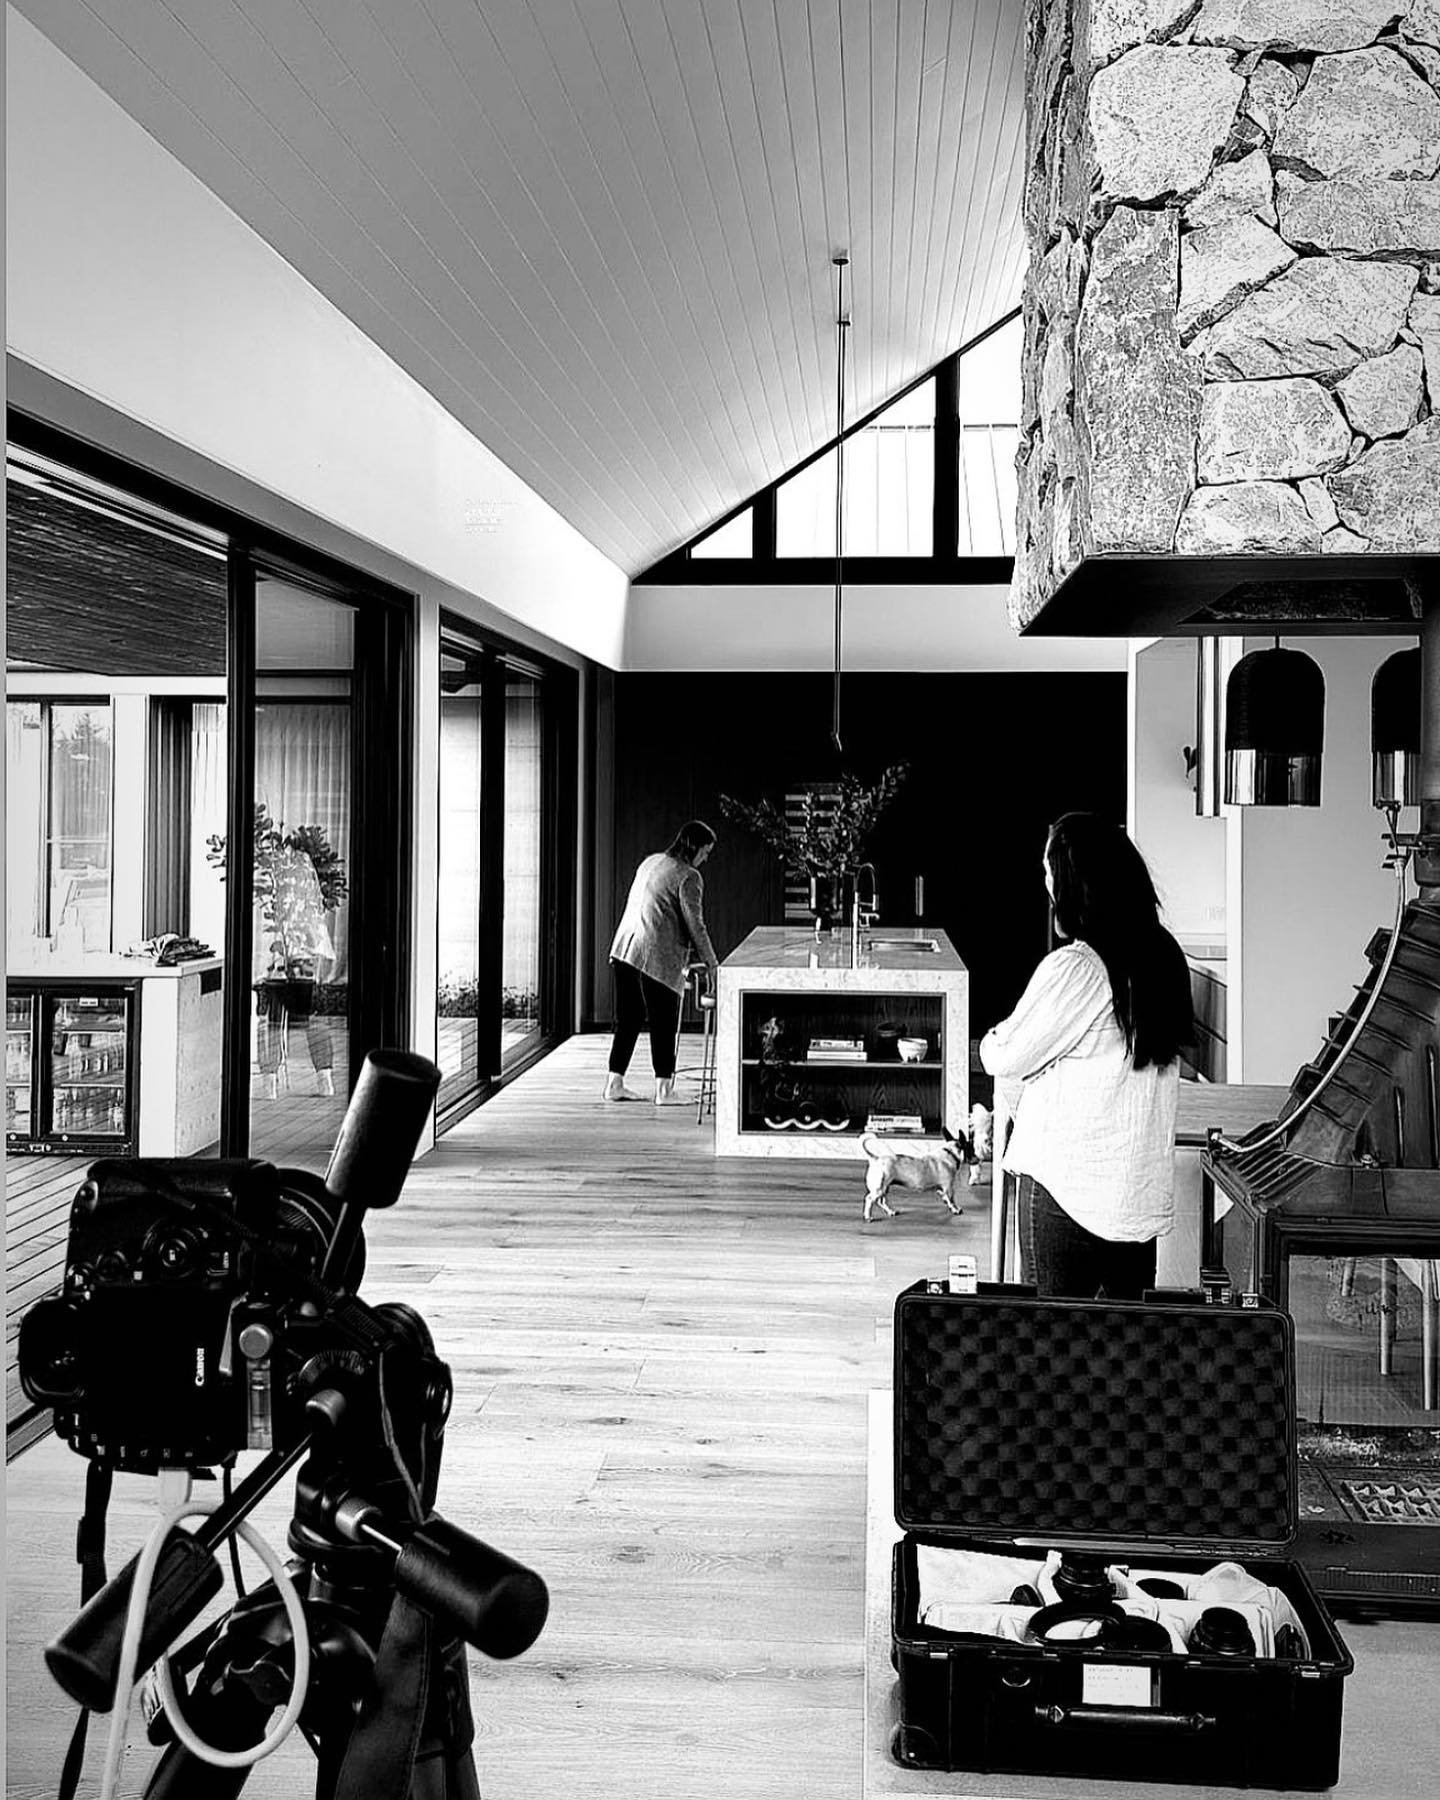 Not every day I get to spend time with insanely talented people @_designbyad @tatjanaplitt @jacquiaddison @shezmcmillan thank you so much for a wonderful day in this stunning home, I soaked in every inch of the design, style, quality and creativity 
